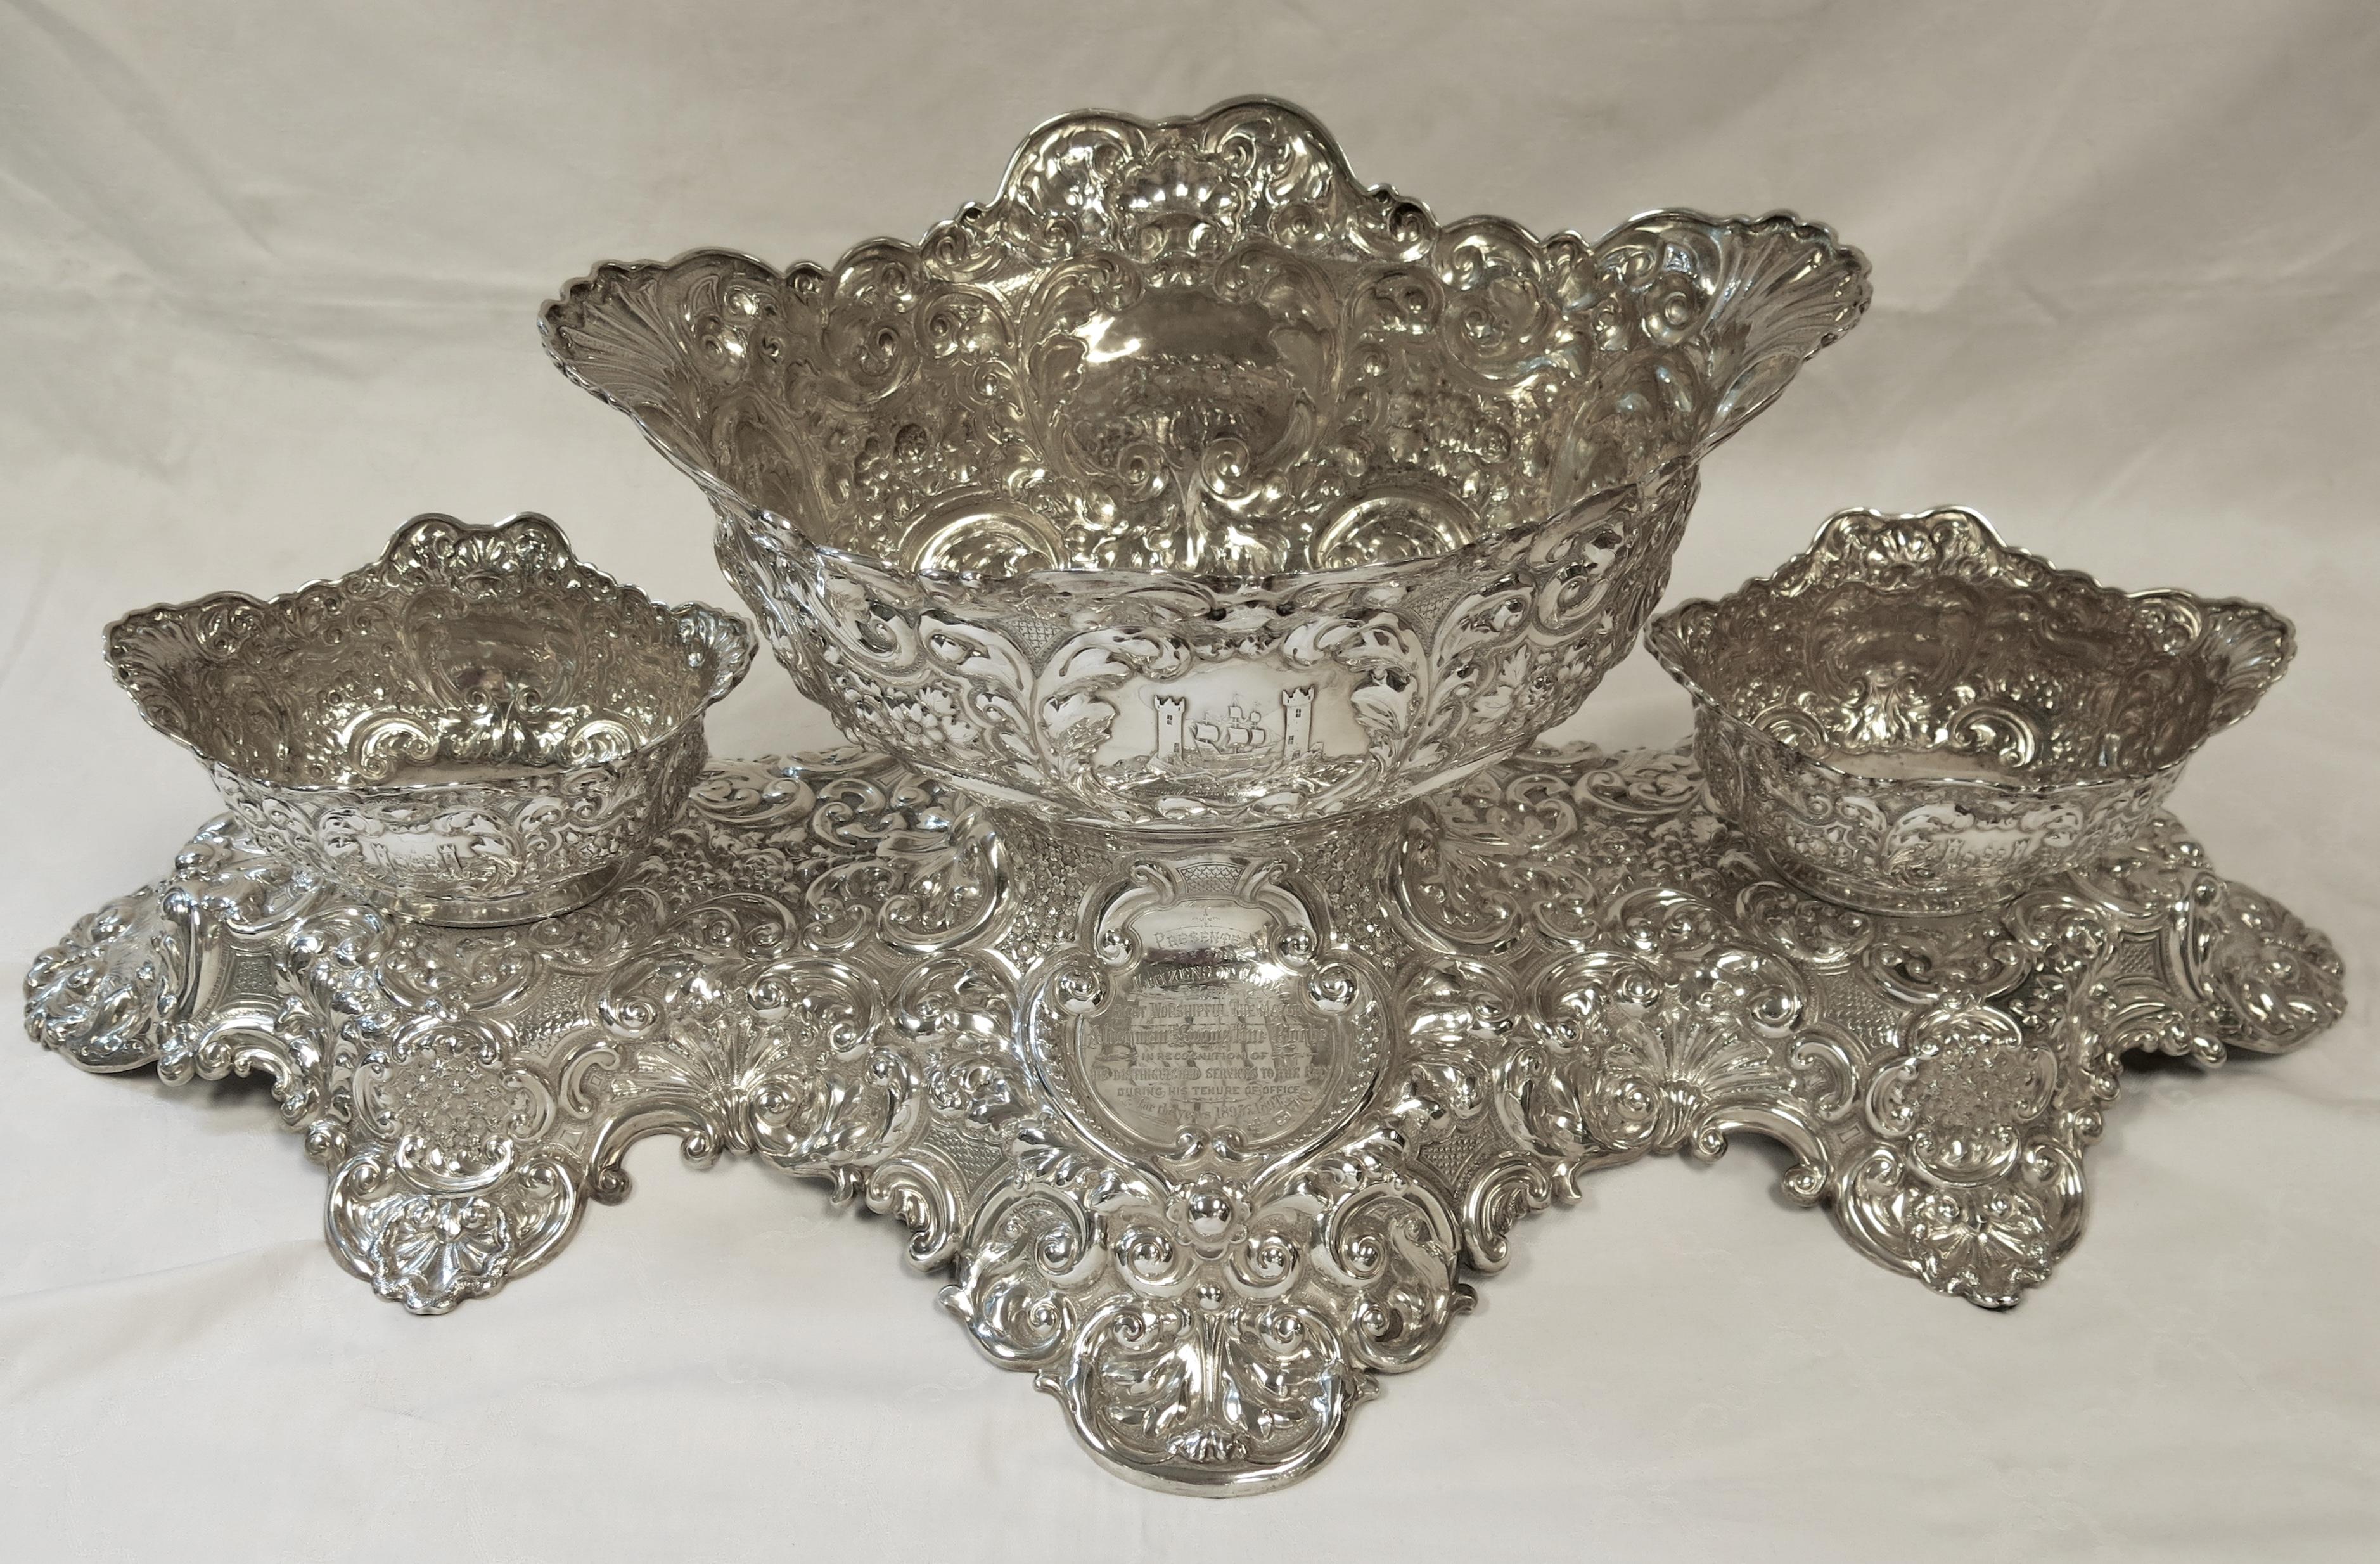 Large and Decorative Antique English Sterling Silver Centerpiece, Irish Interest 5